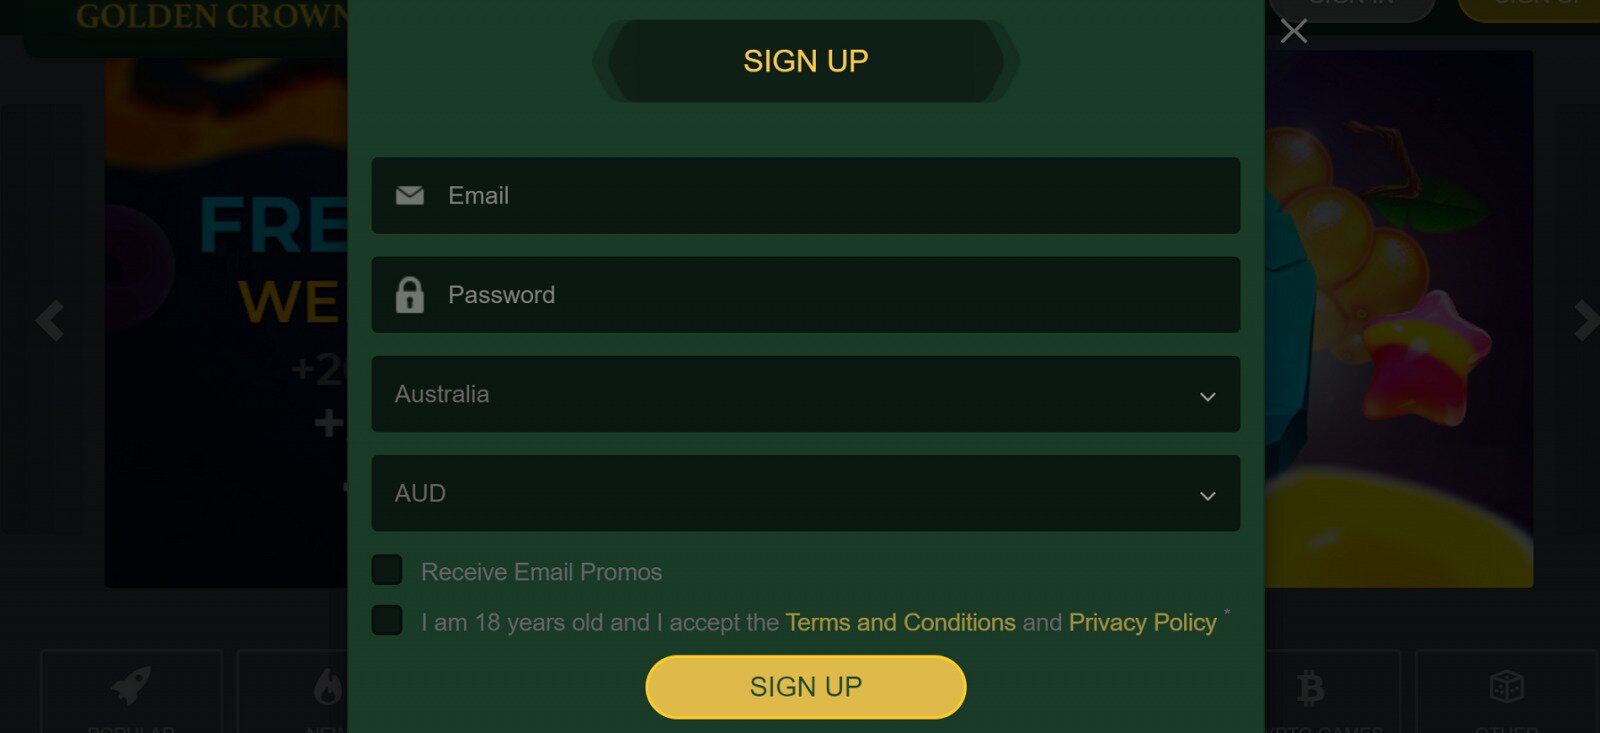 Golden Crown Casino Simple sign up form